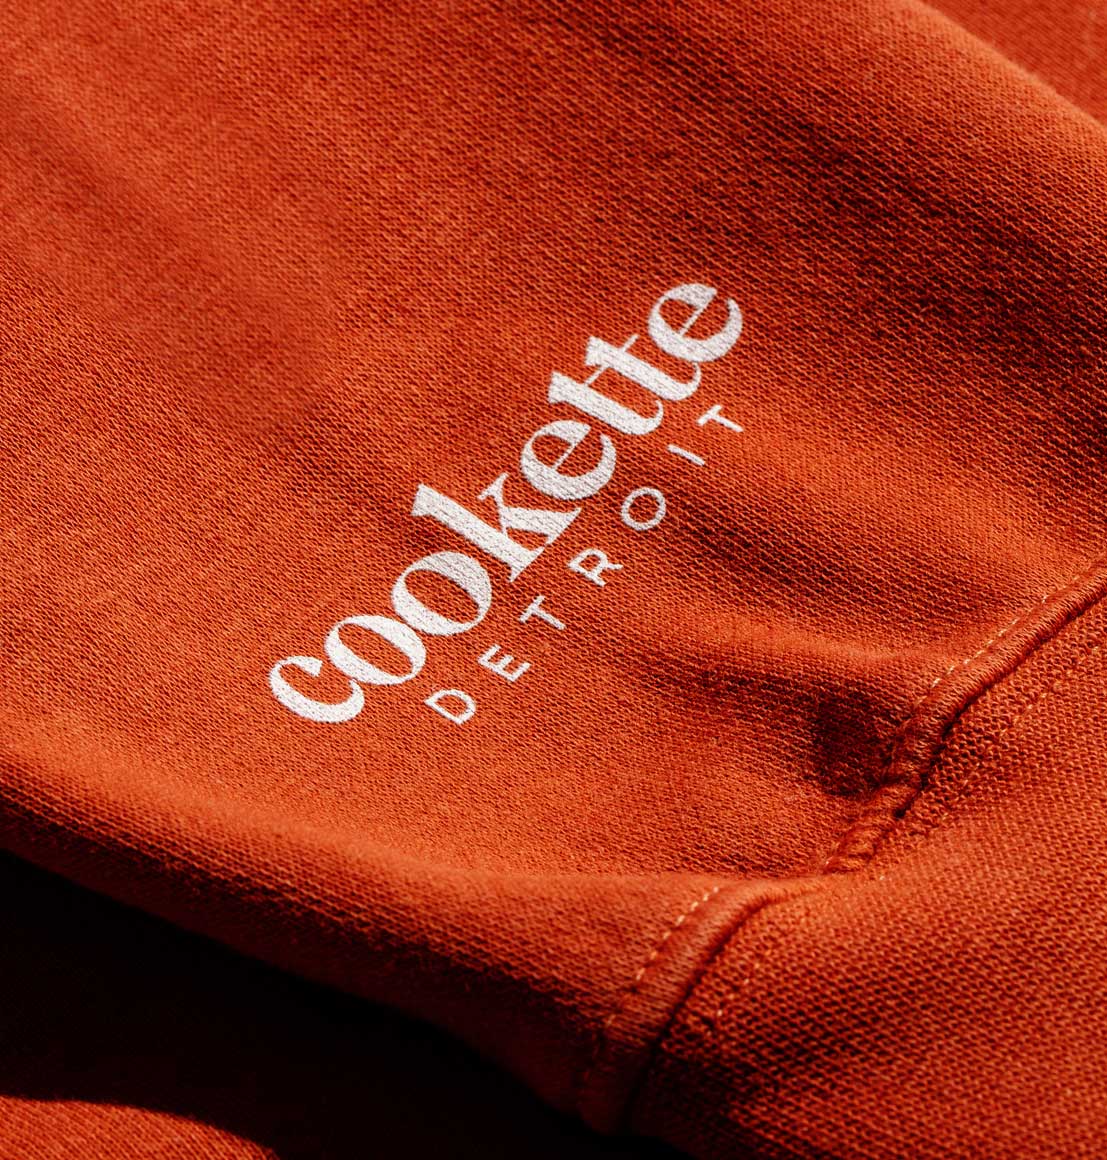 Close-up of Cookette Detroit logo screen-printed on the sleeve of Spicy sweatshirt.